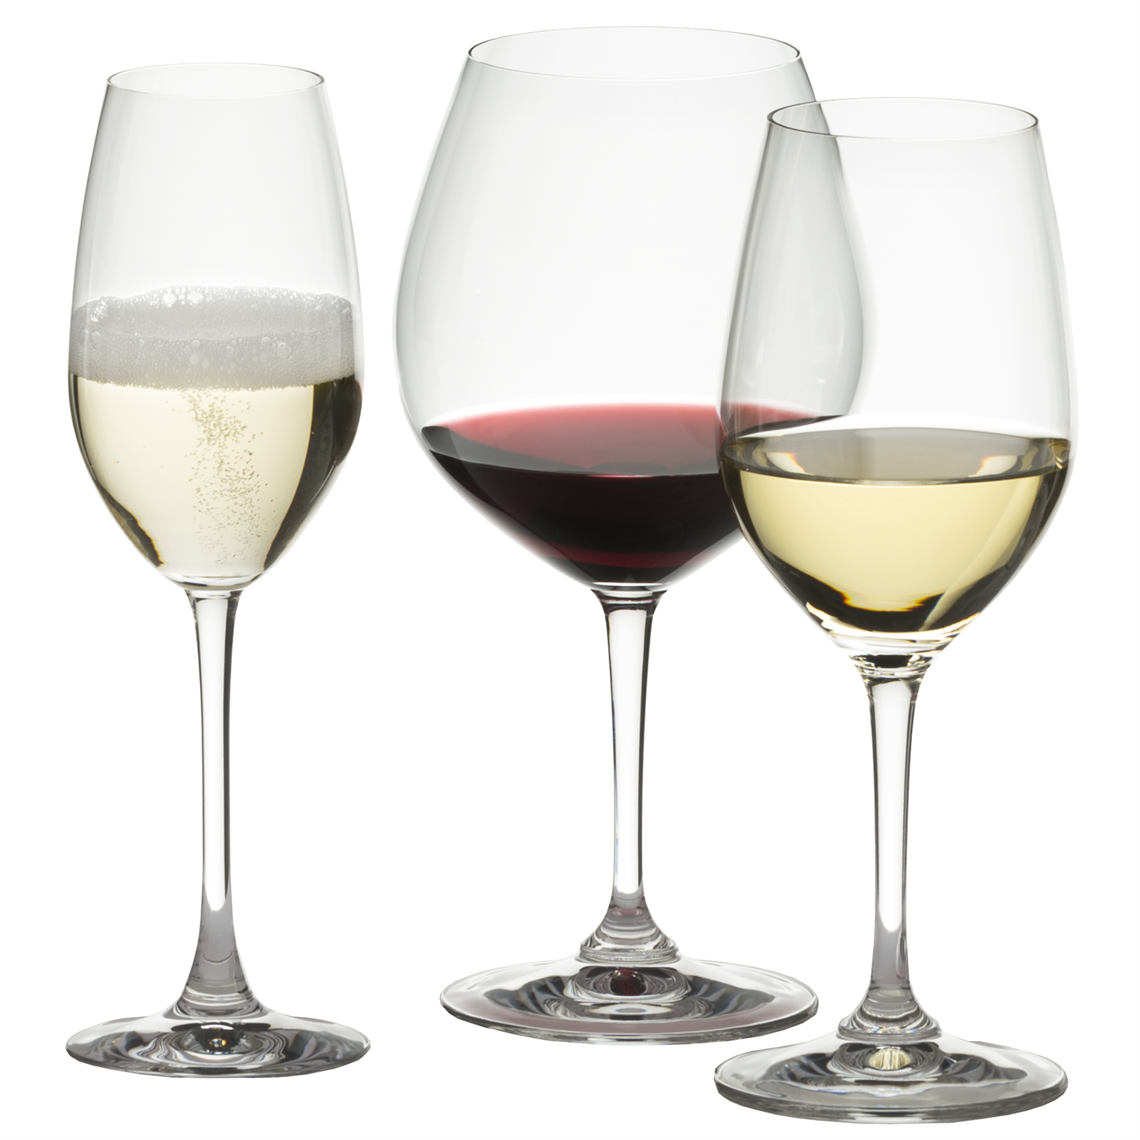 View more wine glasses by region and grape from our Restaurant & Trade Glasses range